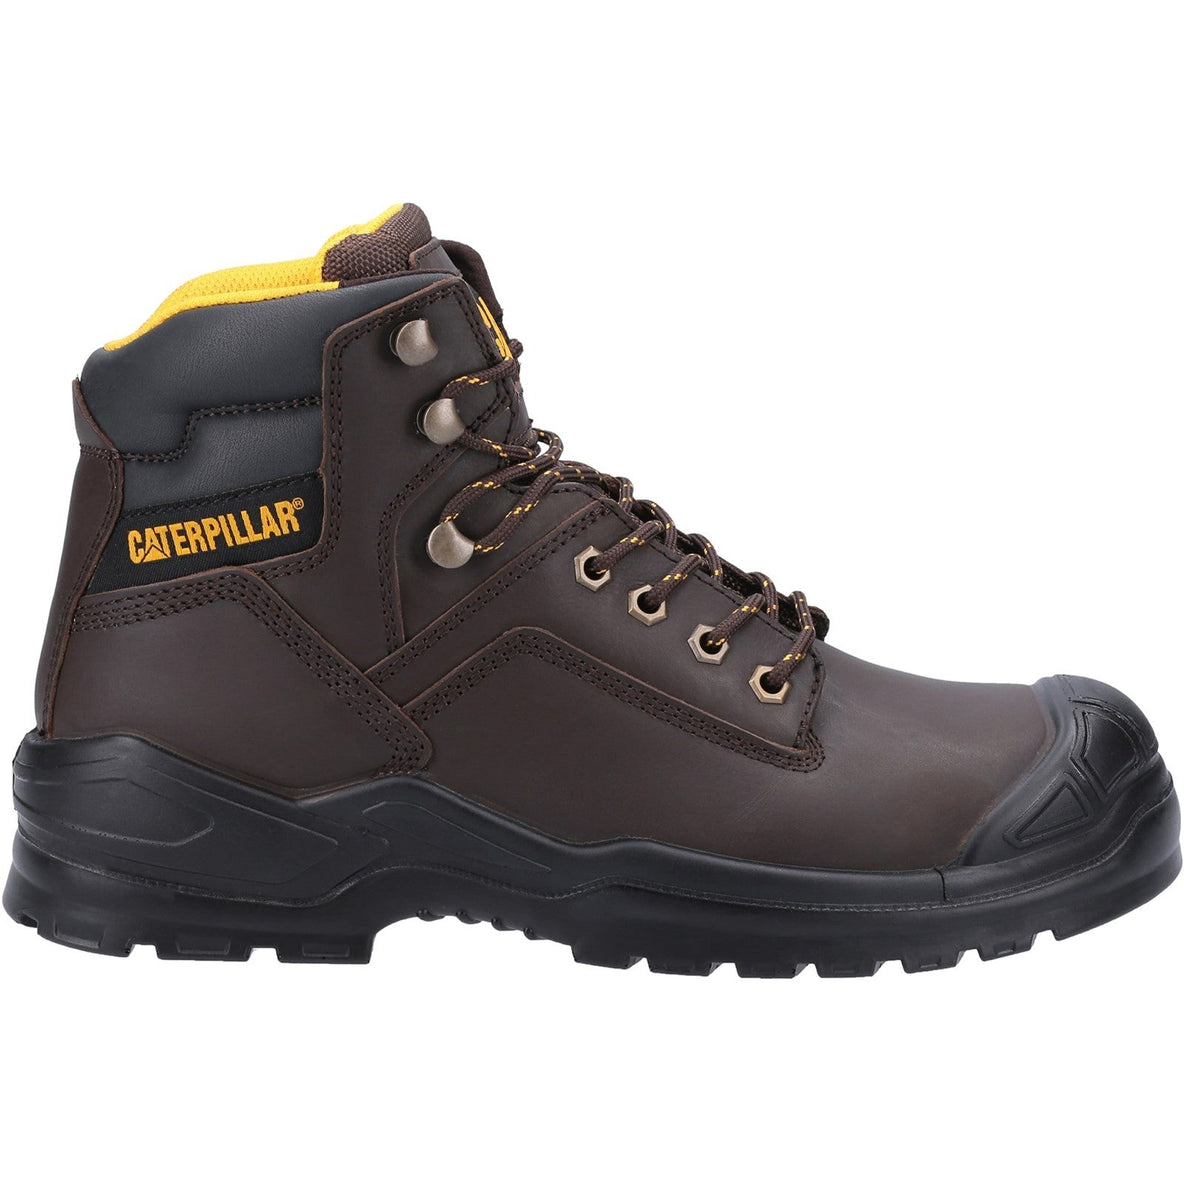 Caterpillar Striver Mid S3 Safety Boot in Brown 